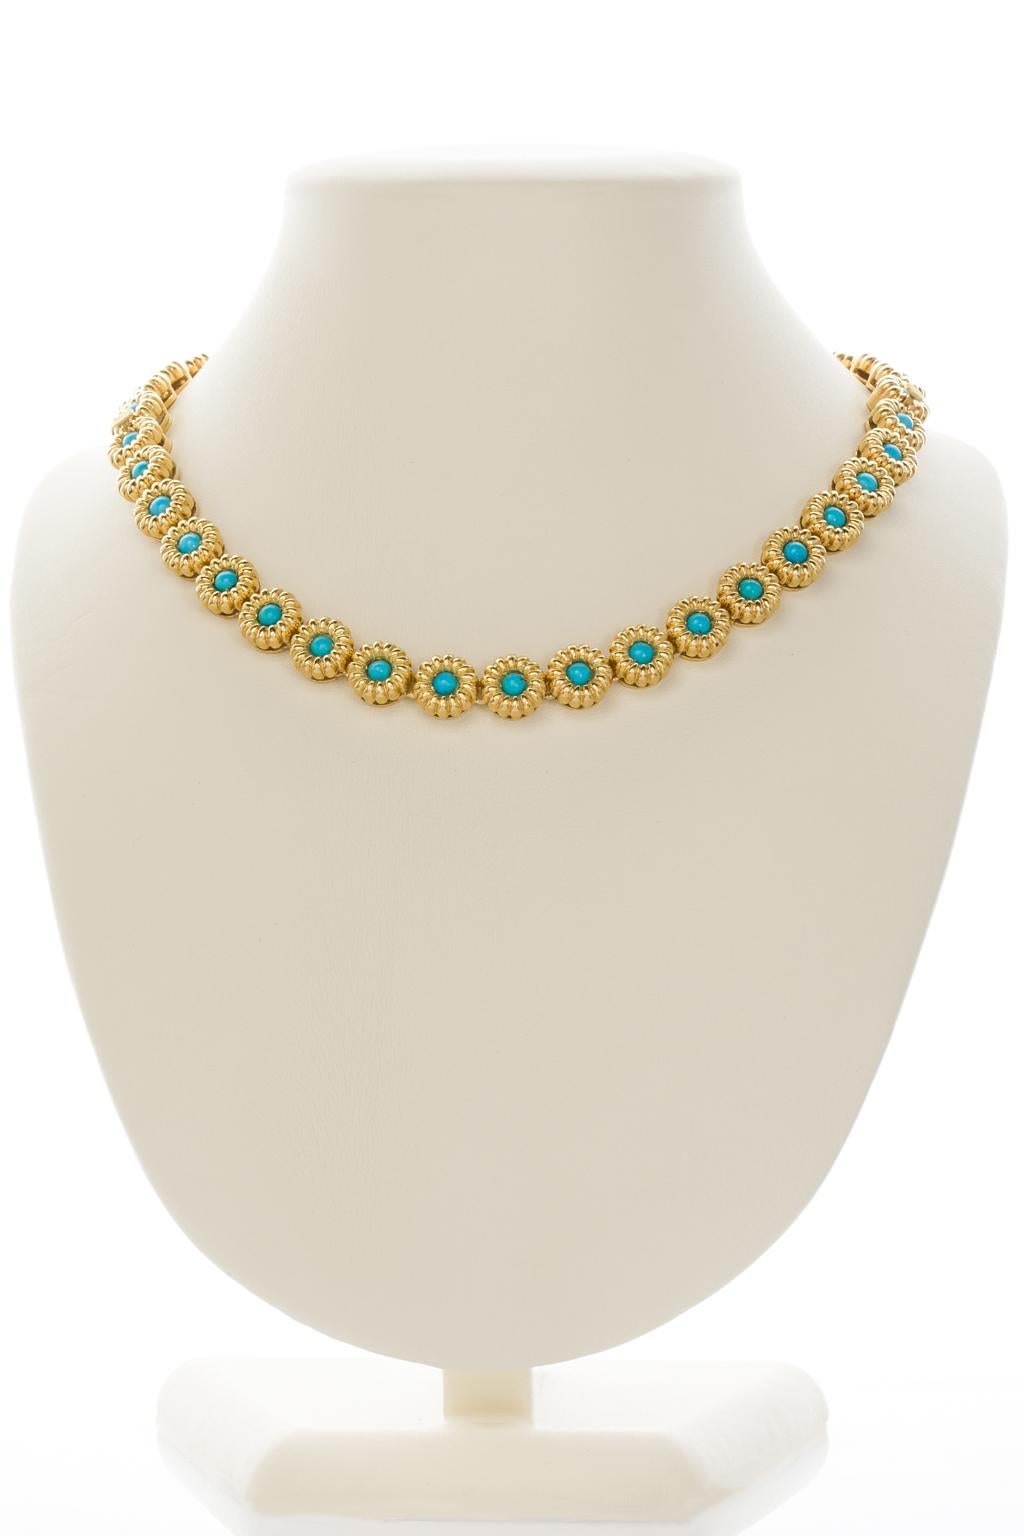 Pretty, versatile and so wearable, these two 18k yellow gold turquoise bracelets can convert to a choker style necklace, each one a line of sculpted gold floral links centering on turquoise cabochons. They may be joined together and be worn as a